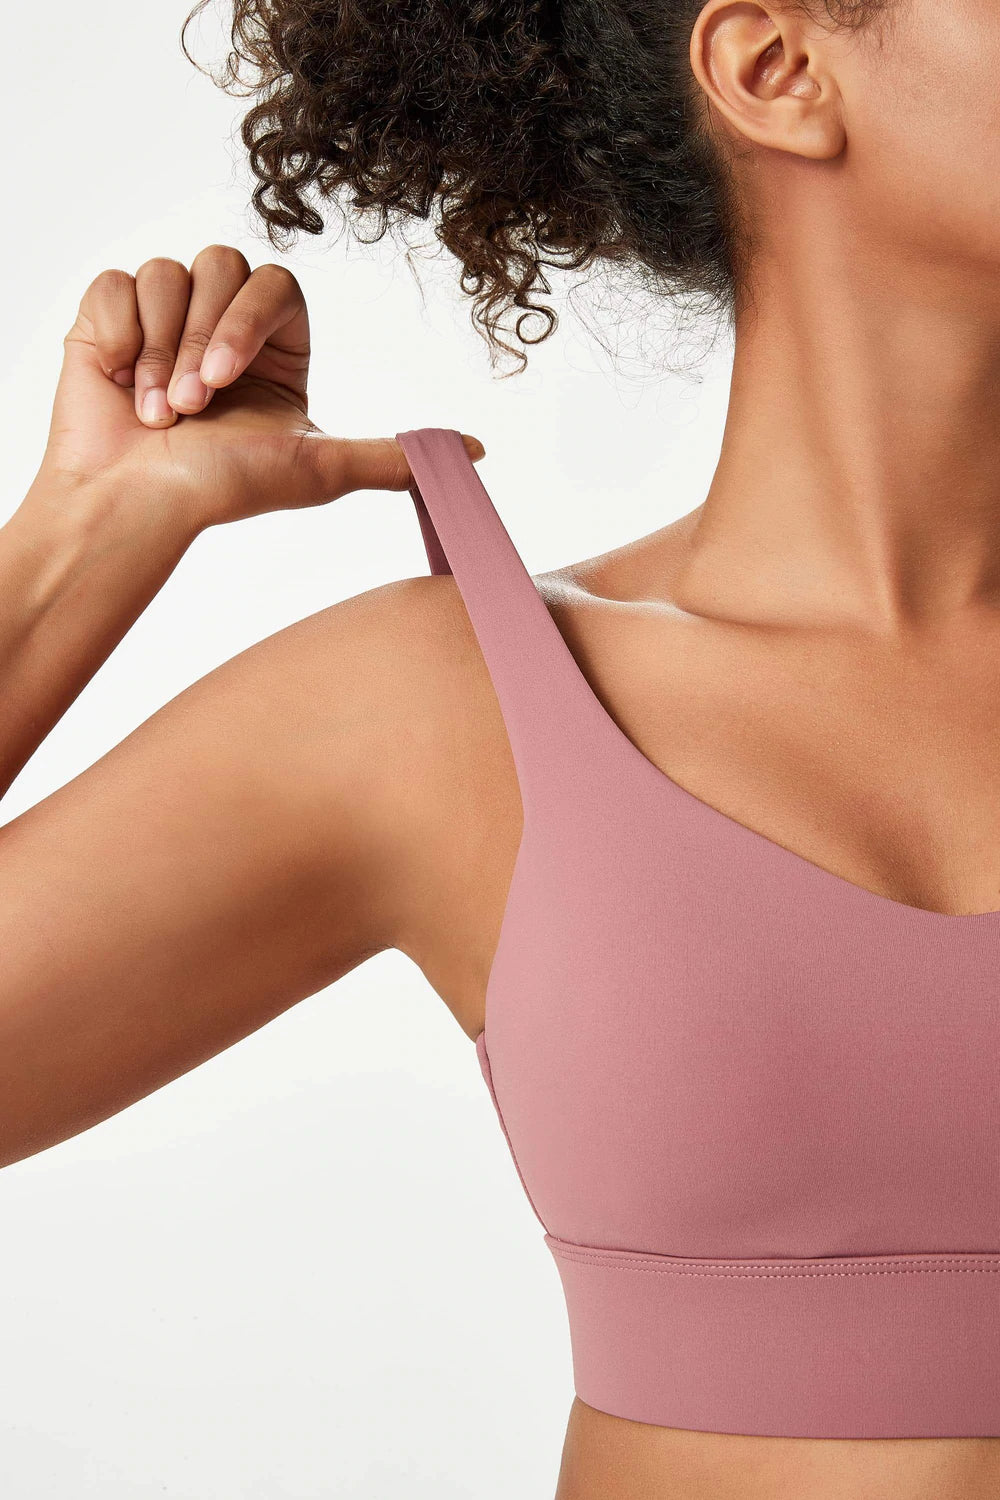 The Must-Have Features For High-Impact Sports Bras